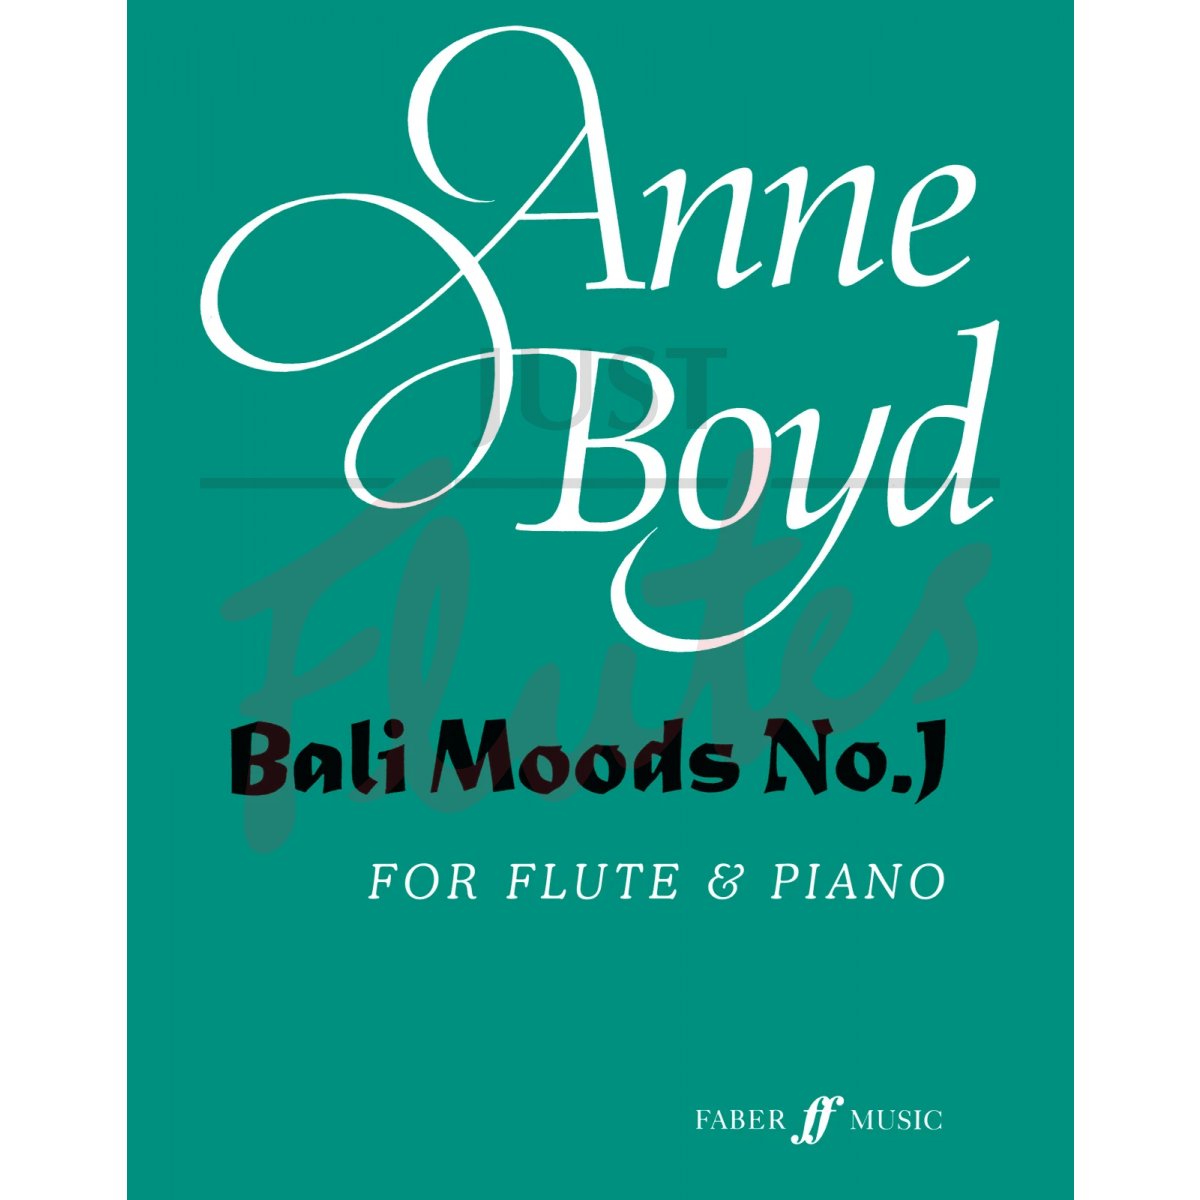 Bali Moods No. 1 for Flute and Piano